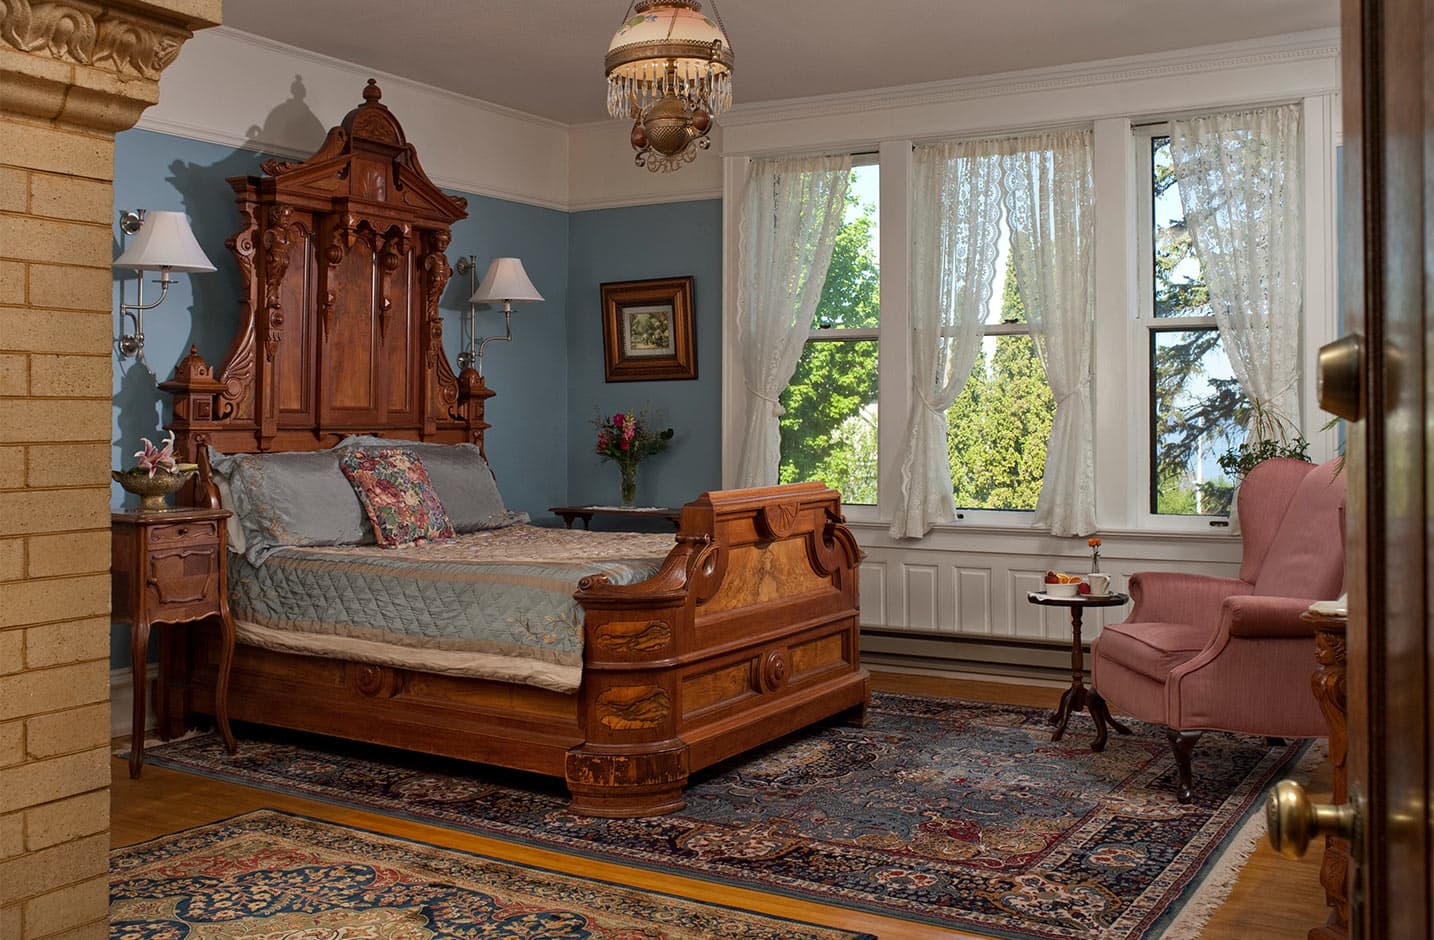 Ornate wood bed with side table, pink chair, and three windows